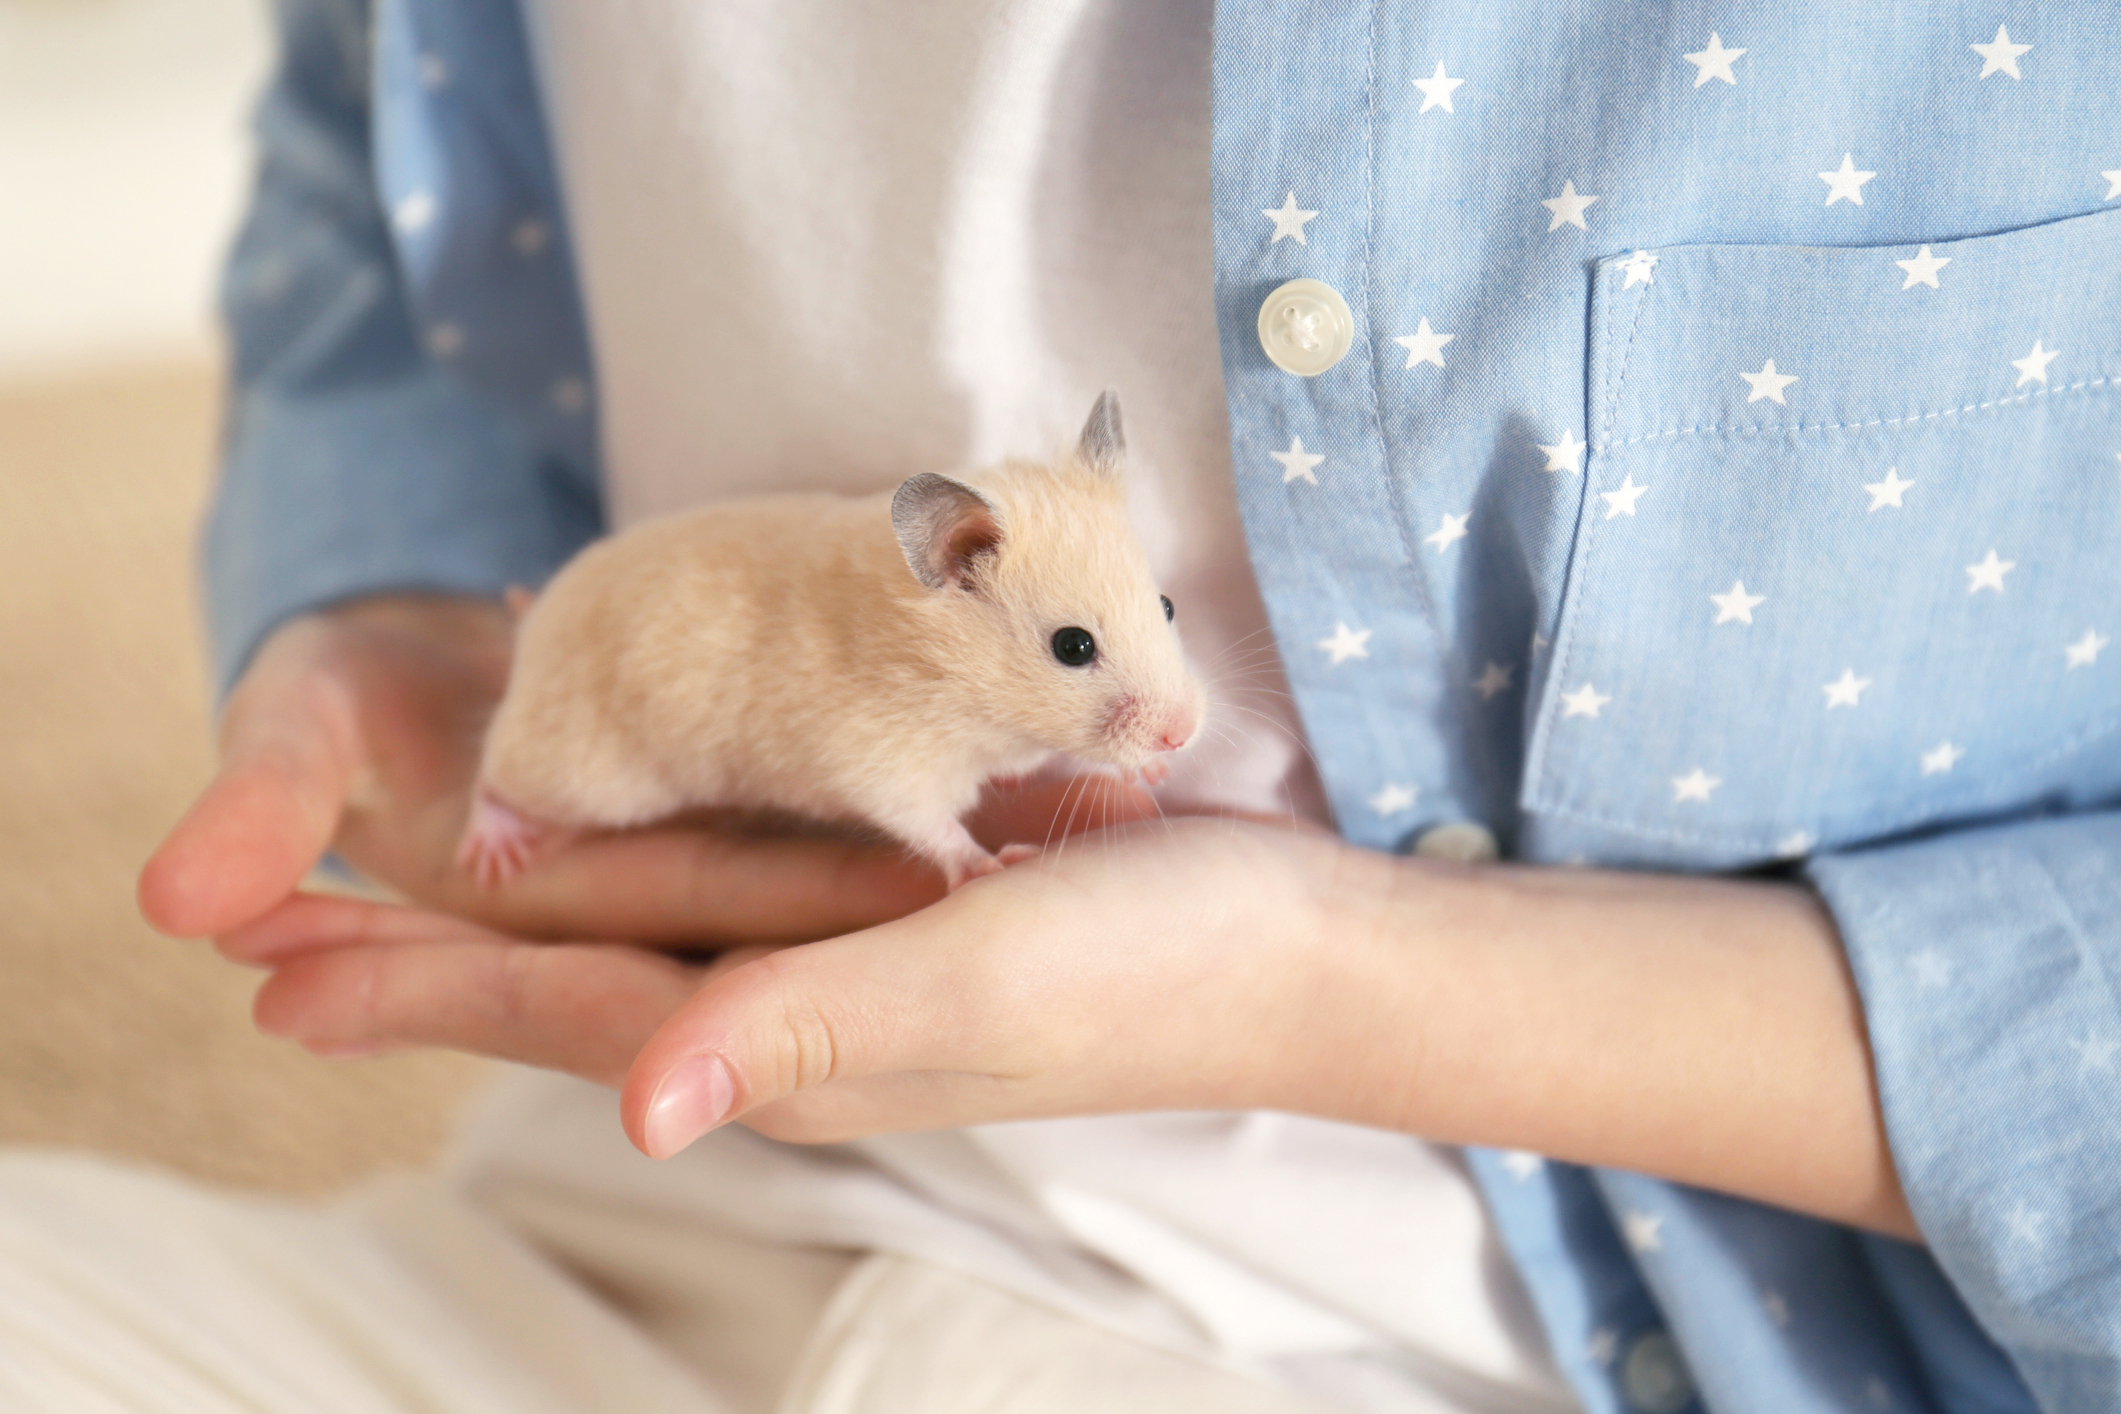 How to Tame a Hamster in 7 Easy-To-Follow Steps?